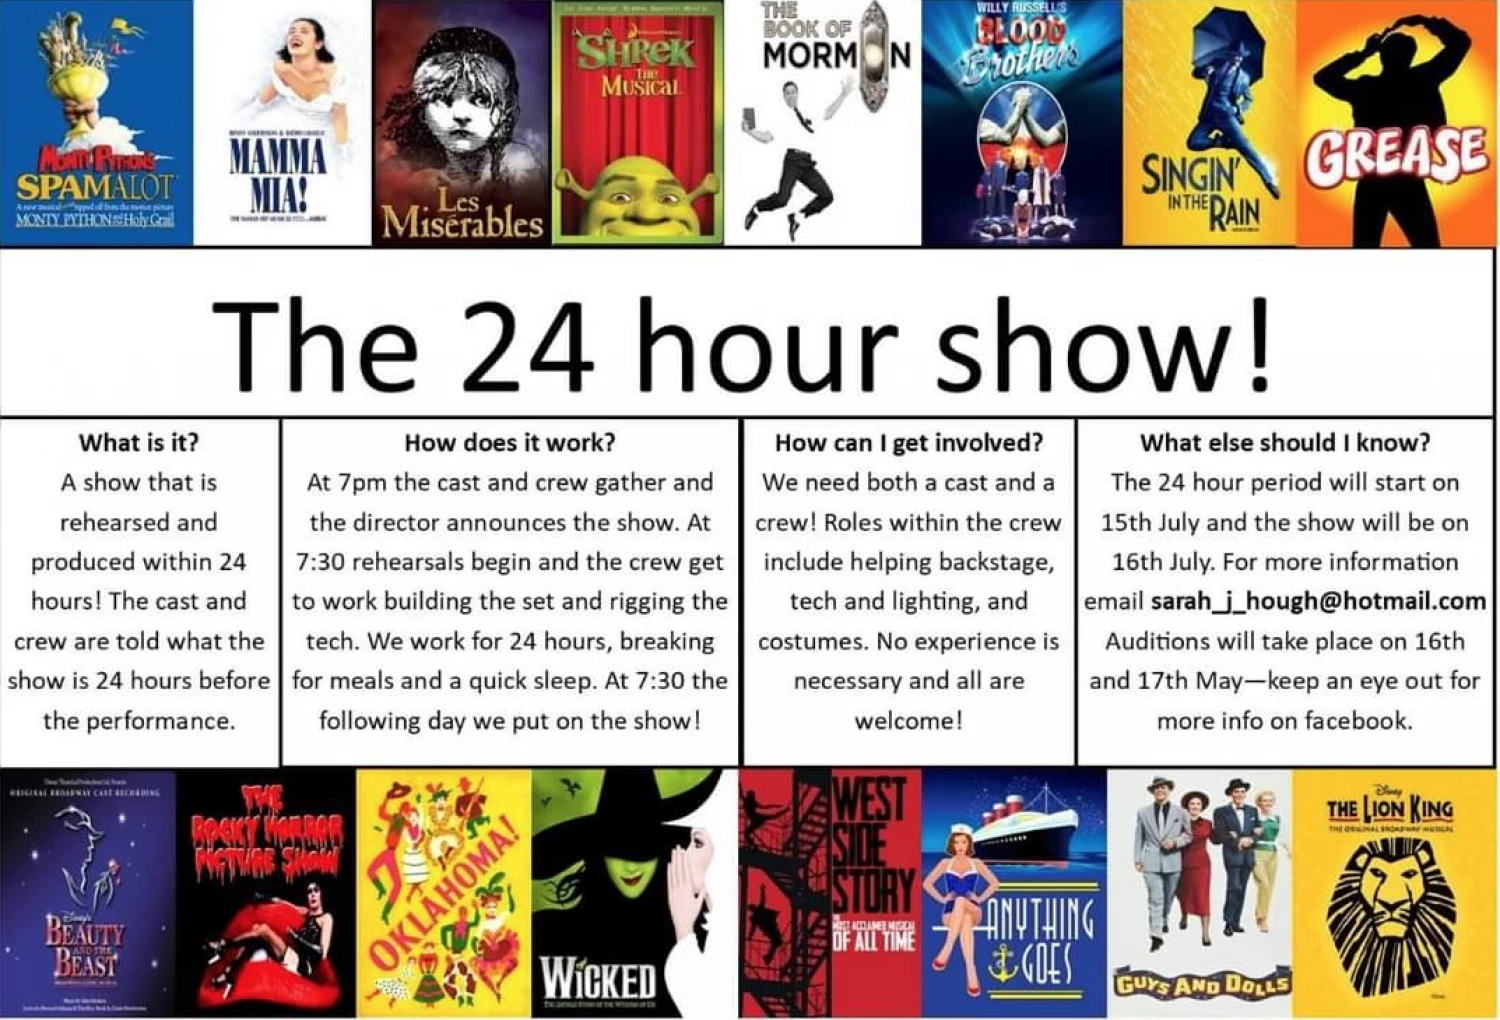 24 hours show